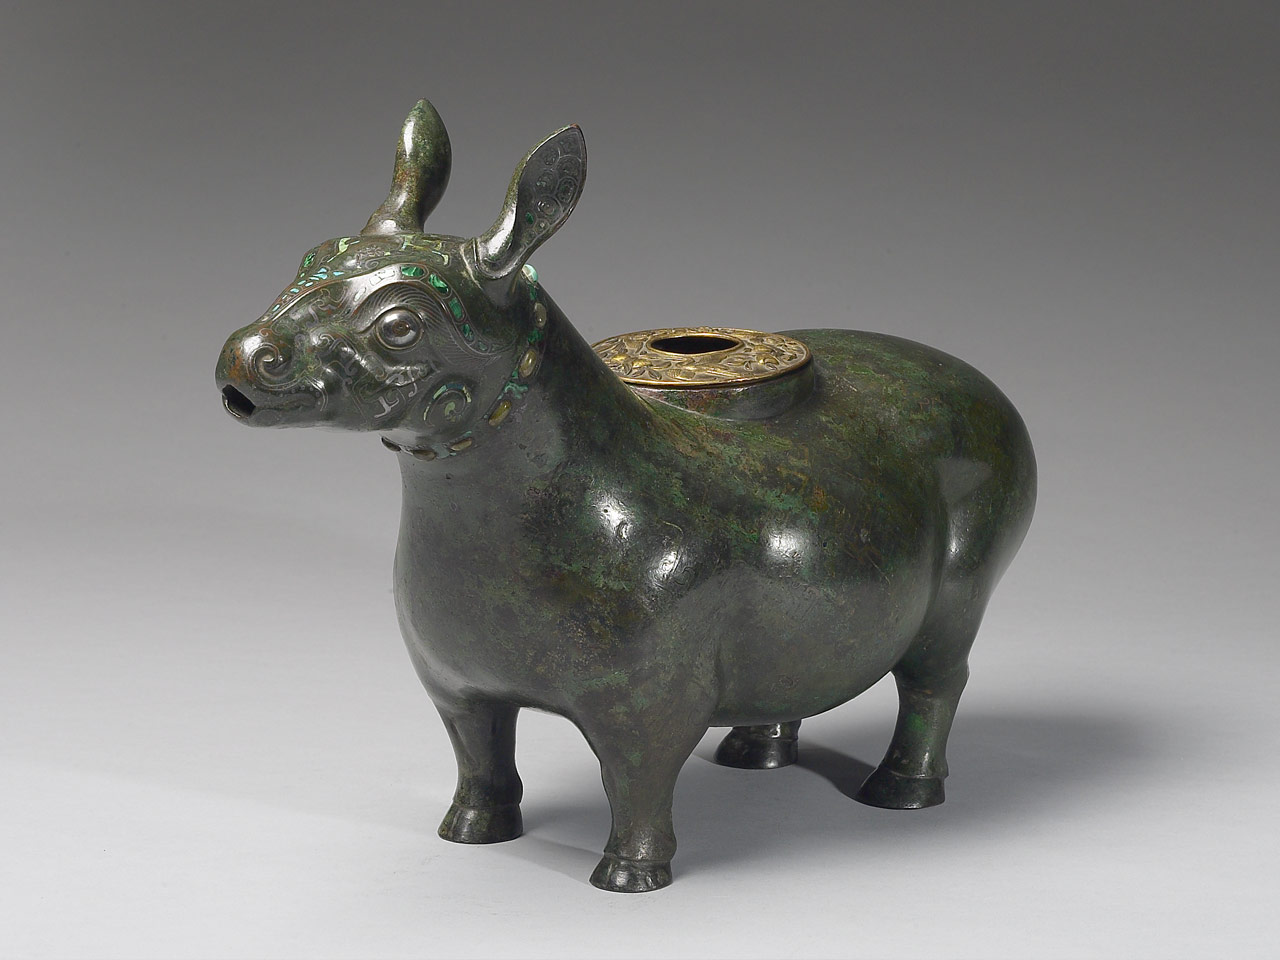 Zun wine vessel in the shape of animal with malachite and turqoise inlay, Mid Warring States Period